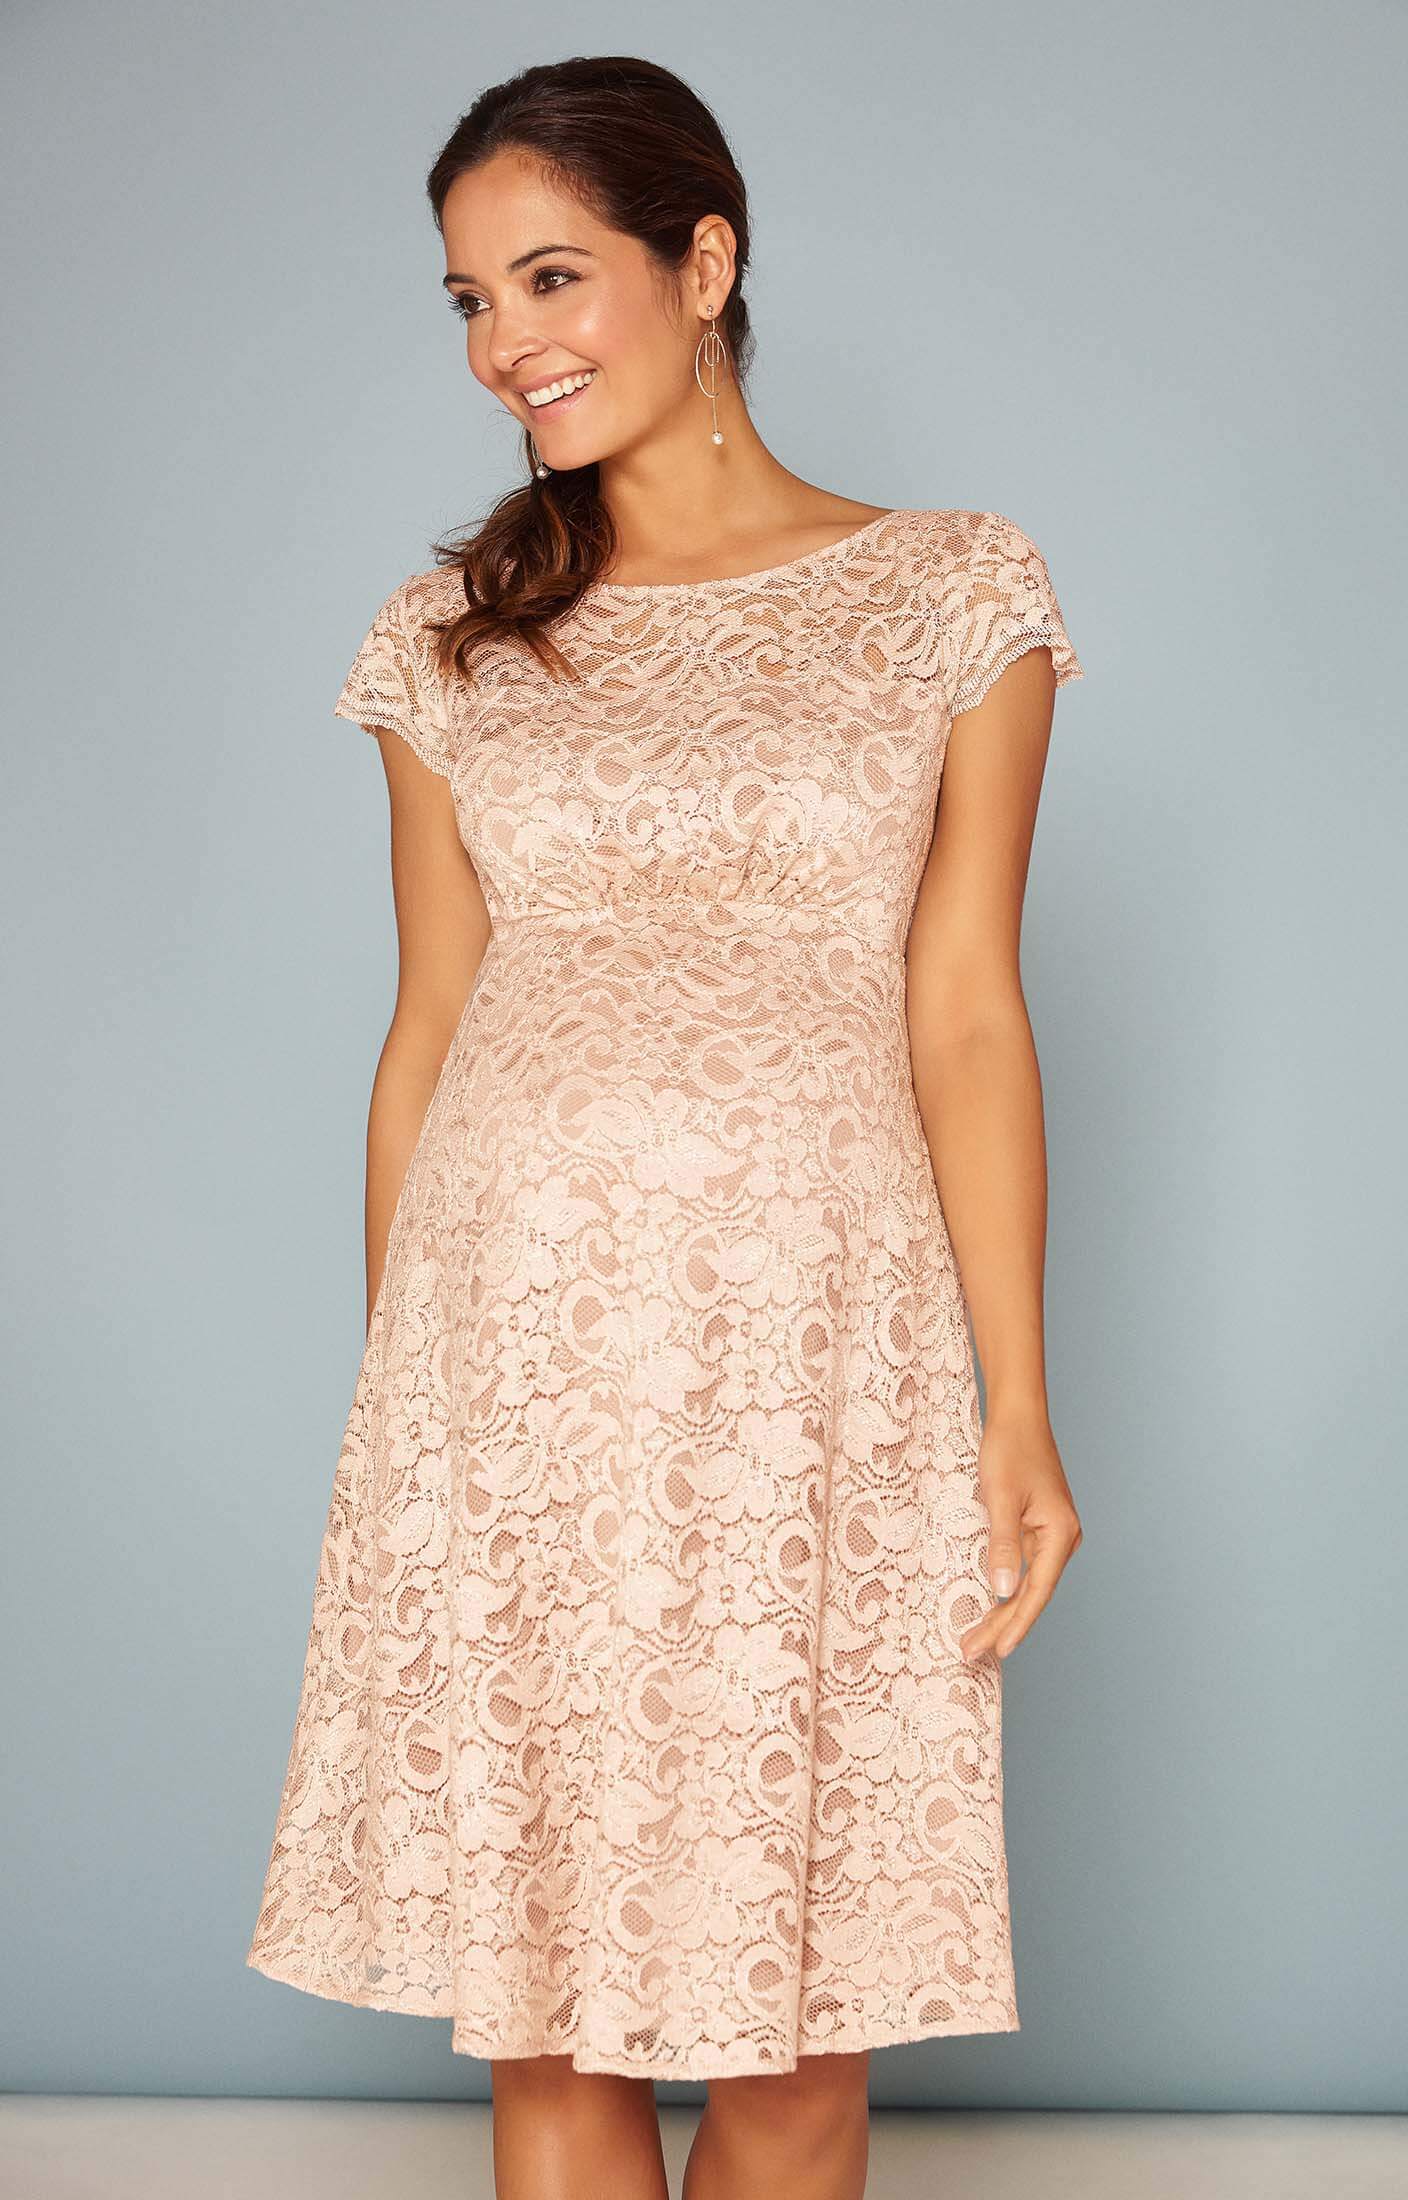 Viola Maternity Lace Dress in Blush - Maternity Wedding Dresses, Evening  Wear and Party Clothes by Tiffany Rose CA